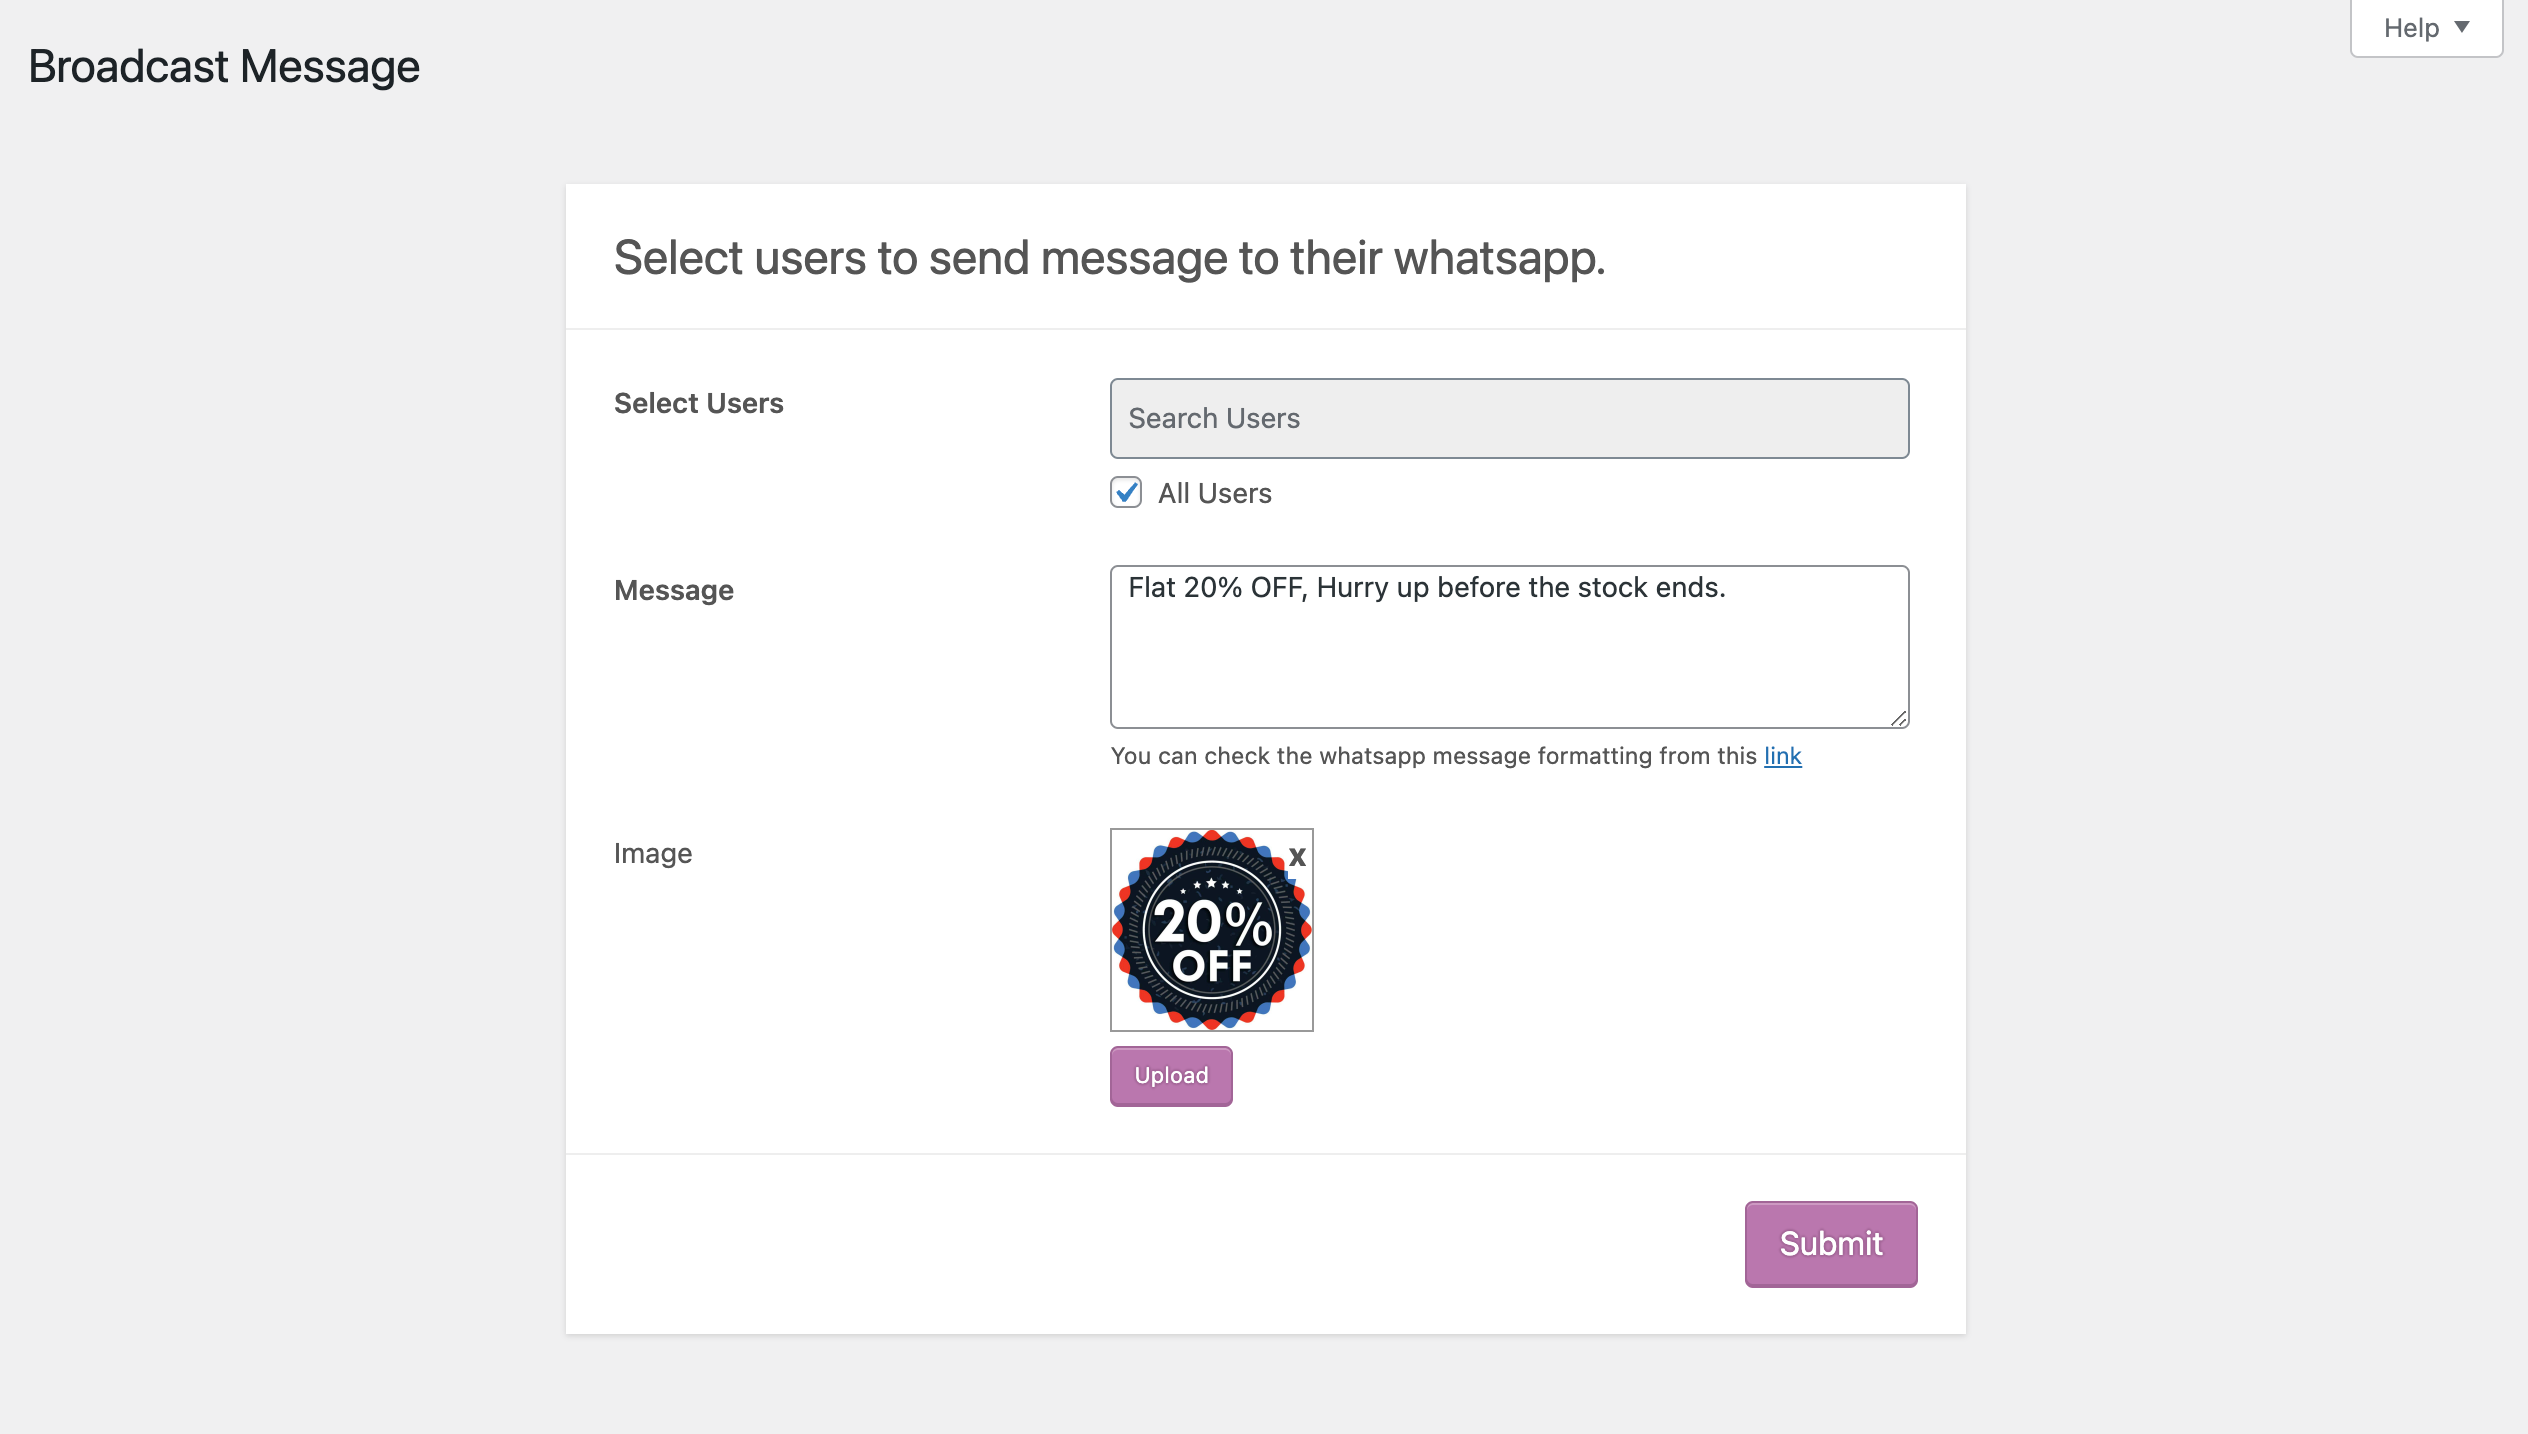 WooCommerce Ultimate WhatsApp Solution broadcast message page